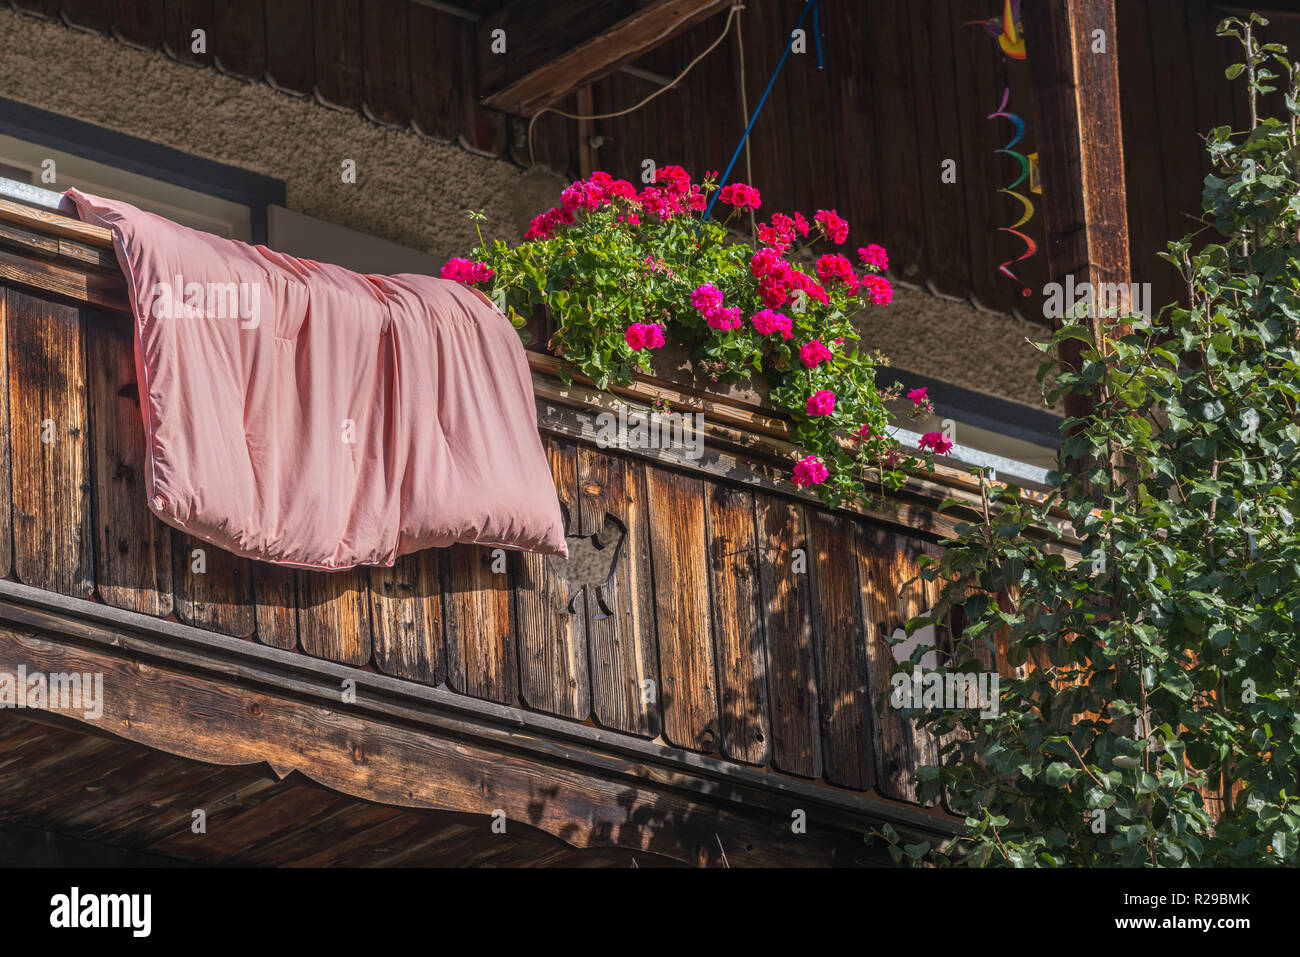 Bedclothes hanging in fresh air on the balcony, Oberammergau, Ammergau Apls, Upper Bavaria, Bavaria, Germany, Europe Stock Photo